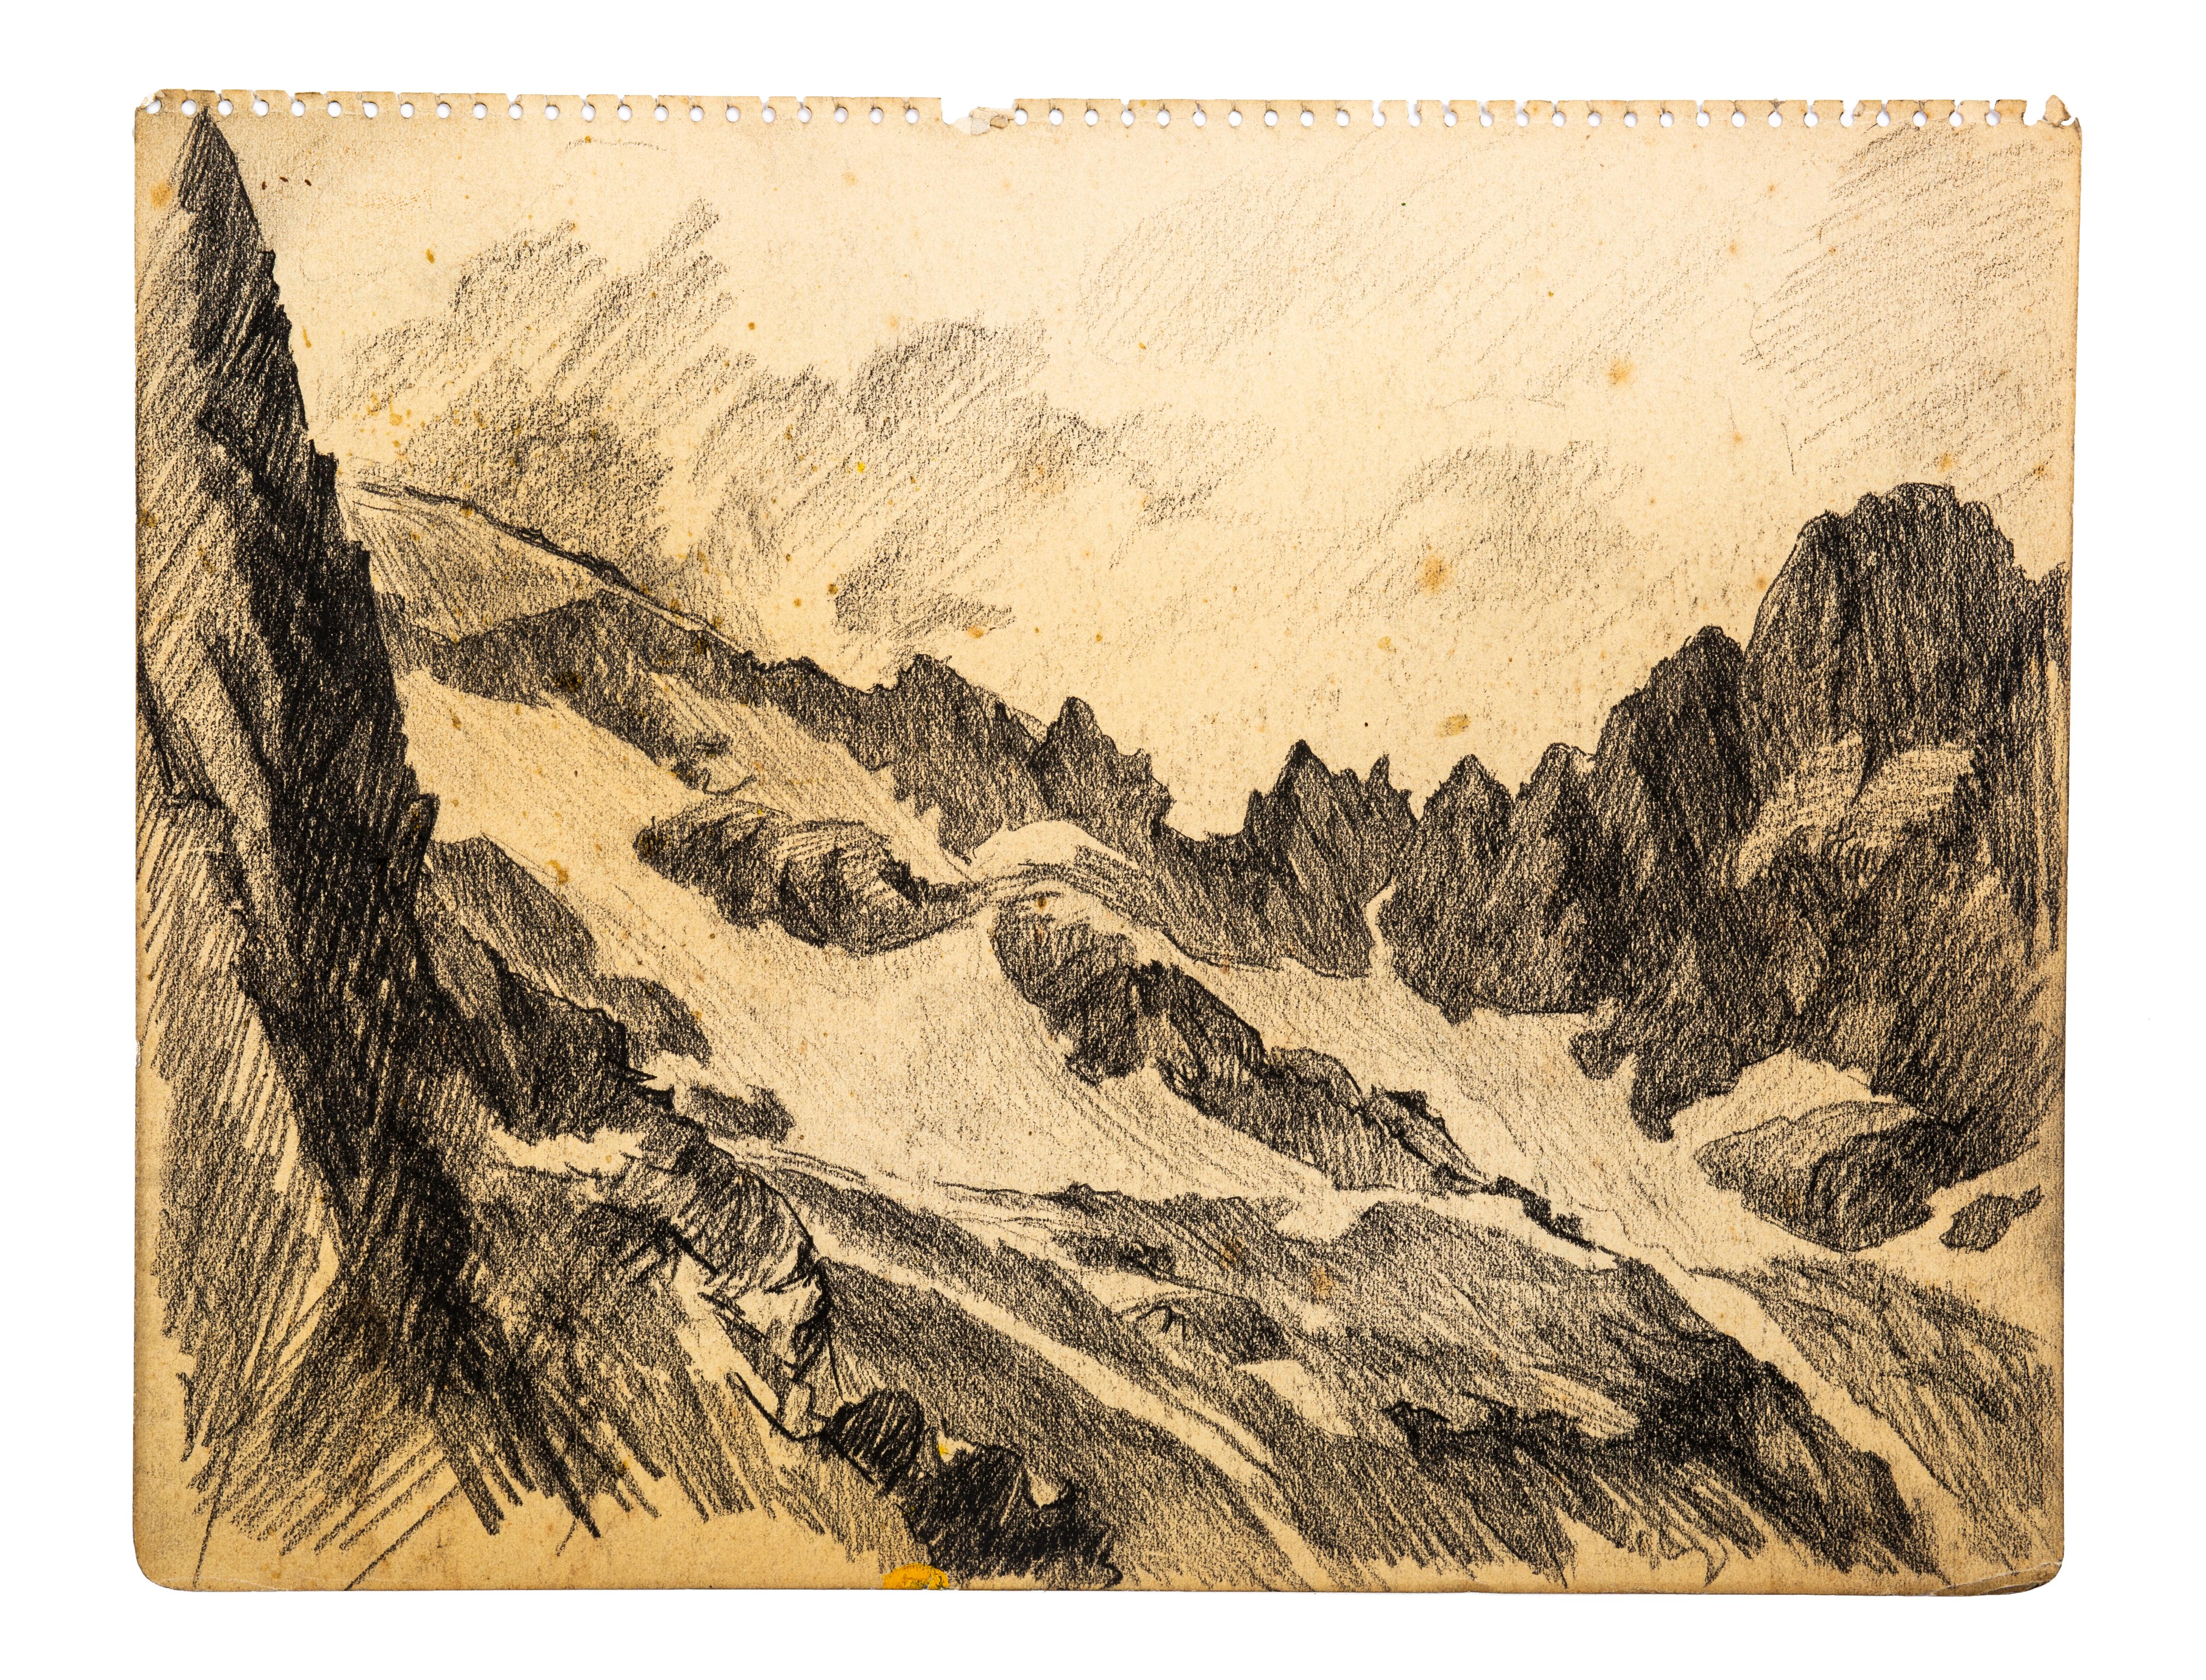 Mountains is a black and white charcoal drawing realized Jean Chapin. 

The artwork represents a beautiful mountain landscape.

Fair conditions (some foxings on the sheet).

Jean Chapin (Paris, 1896 - 1994), a French artist who exhibited his work at